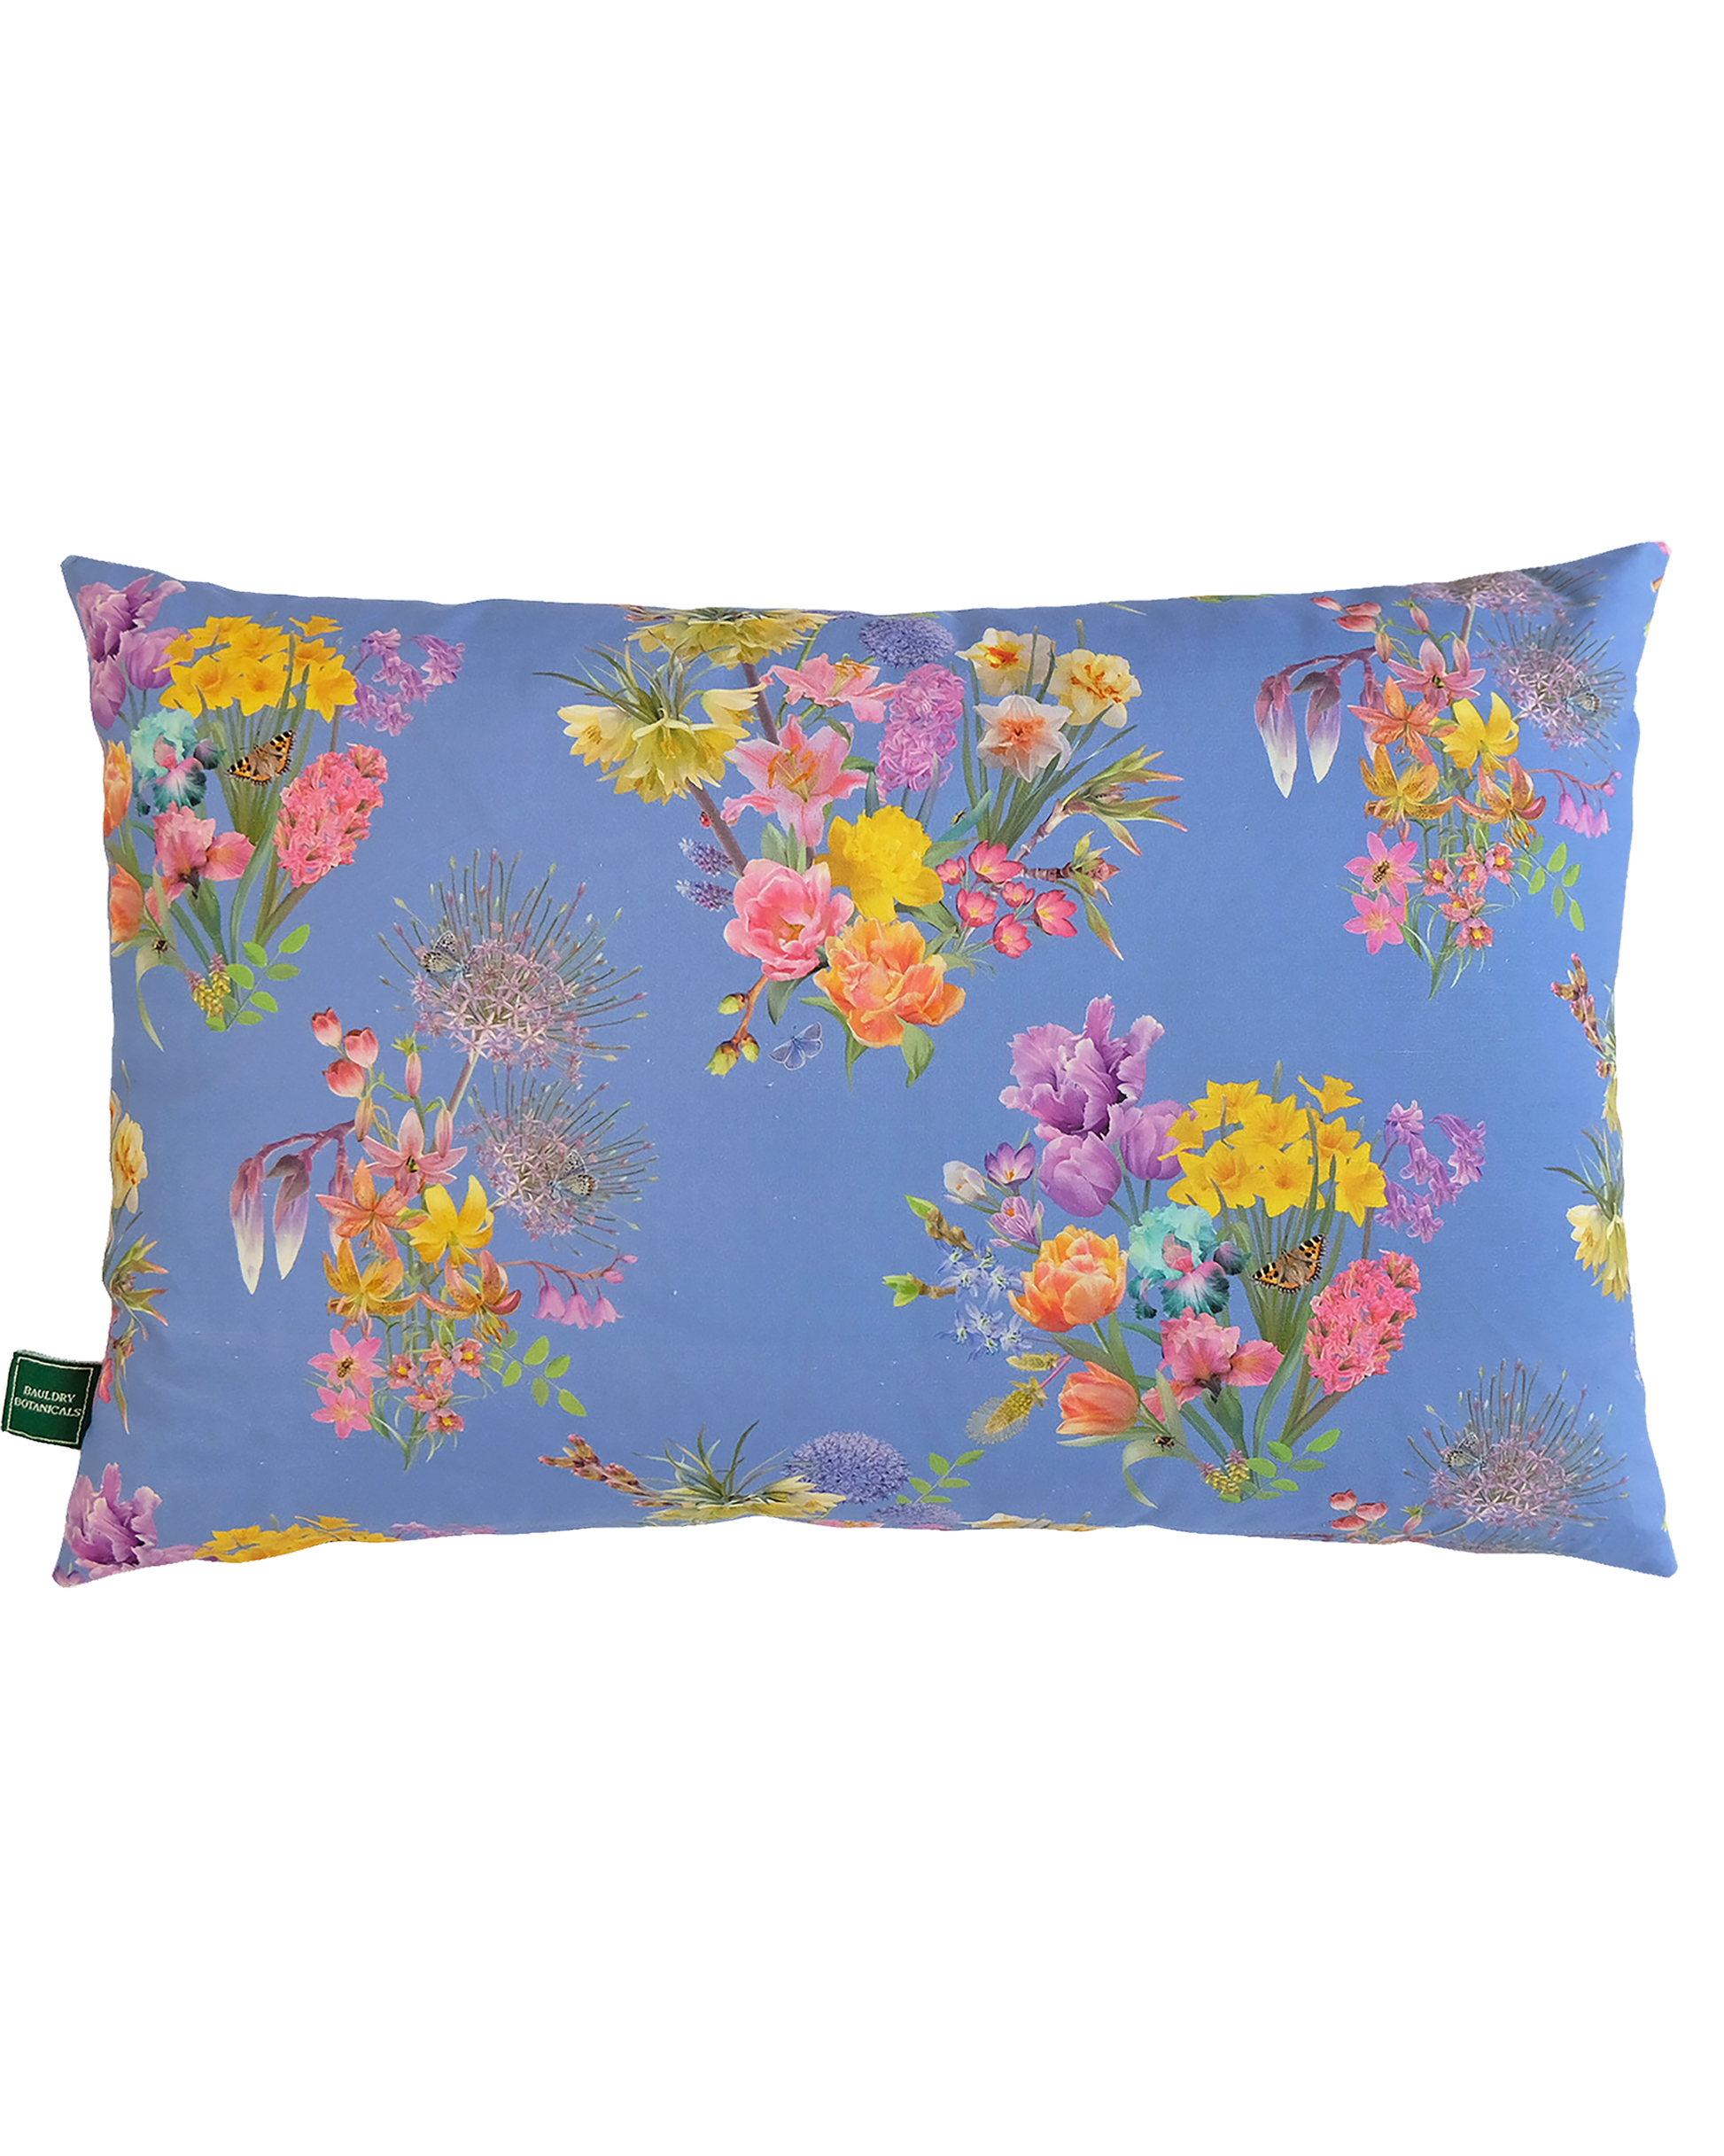 Bright blue hemp pillow for relaxing sustainable interior design inspiration with bold colourful floral patterns